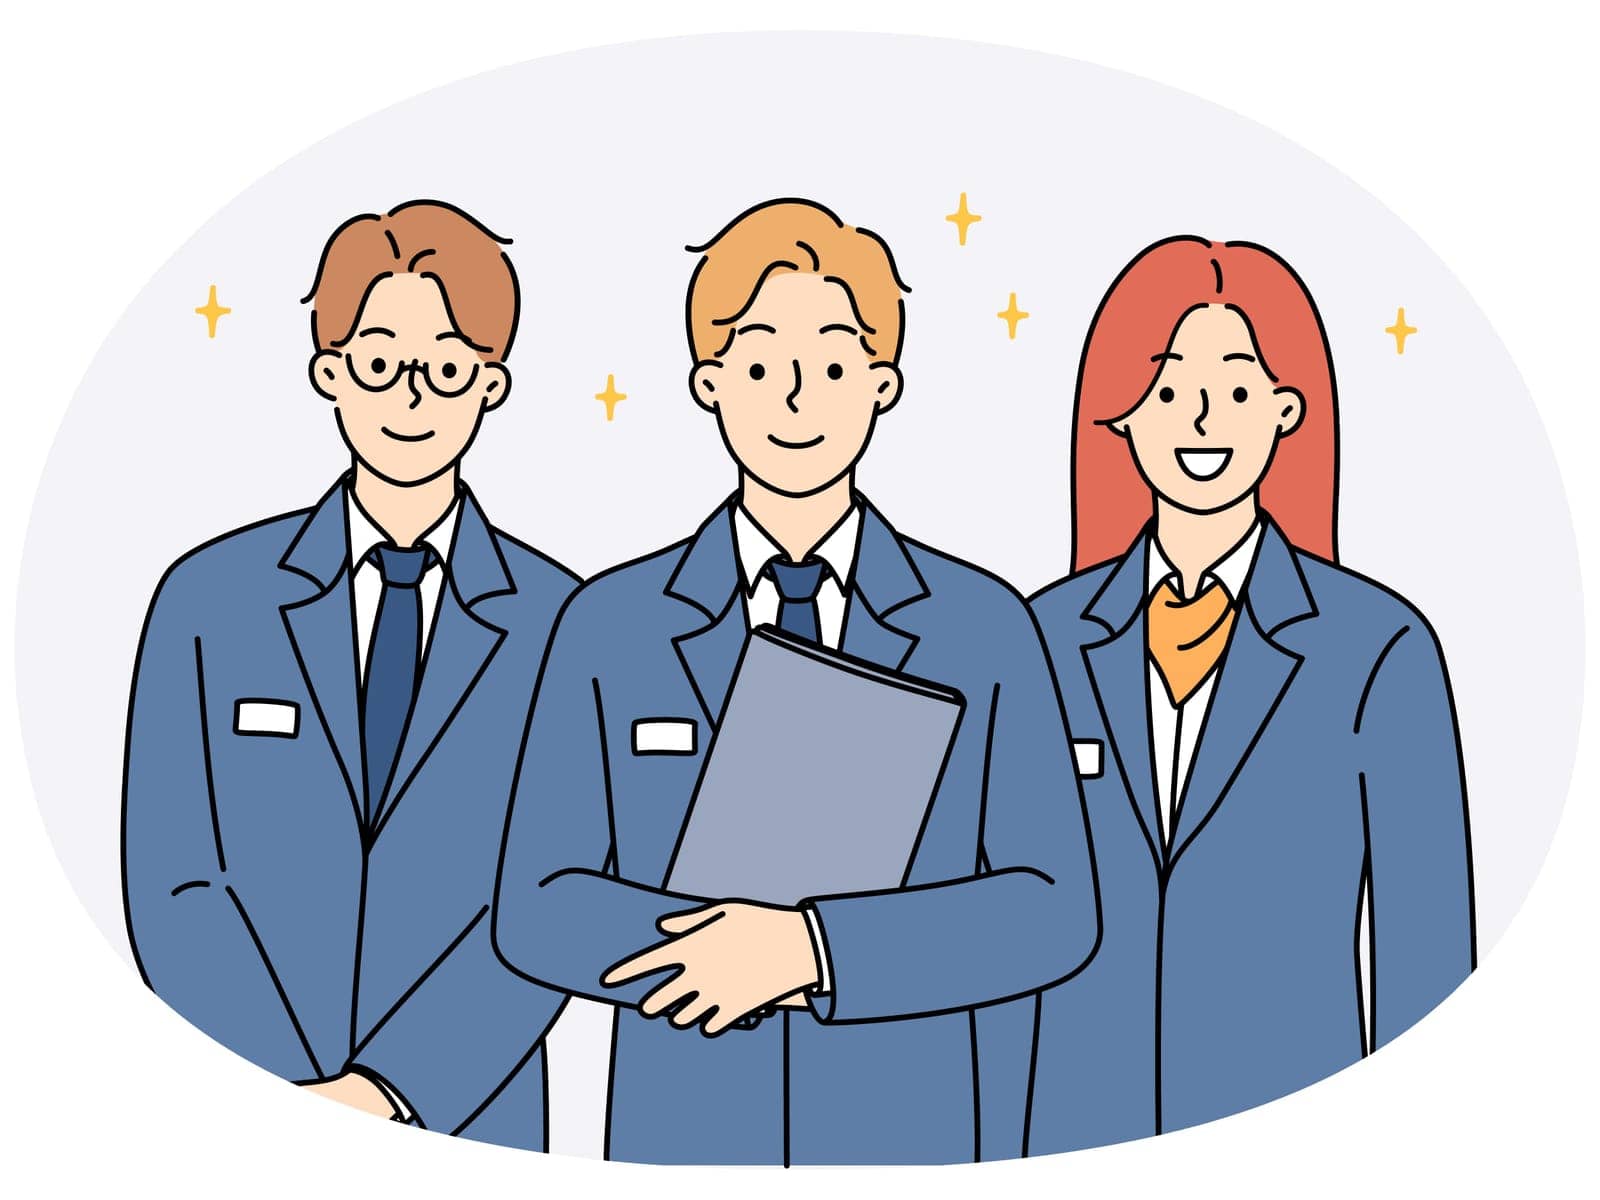 Smiling administration staff in uniform standing together showing unity and leadership. Happy receptionists meet welcome new client. Hotel personnel. Vector illustration.